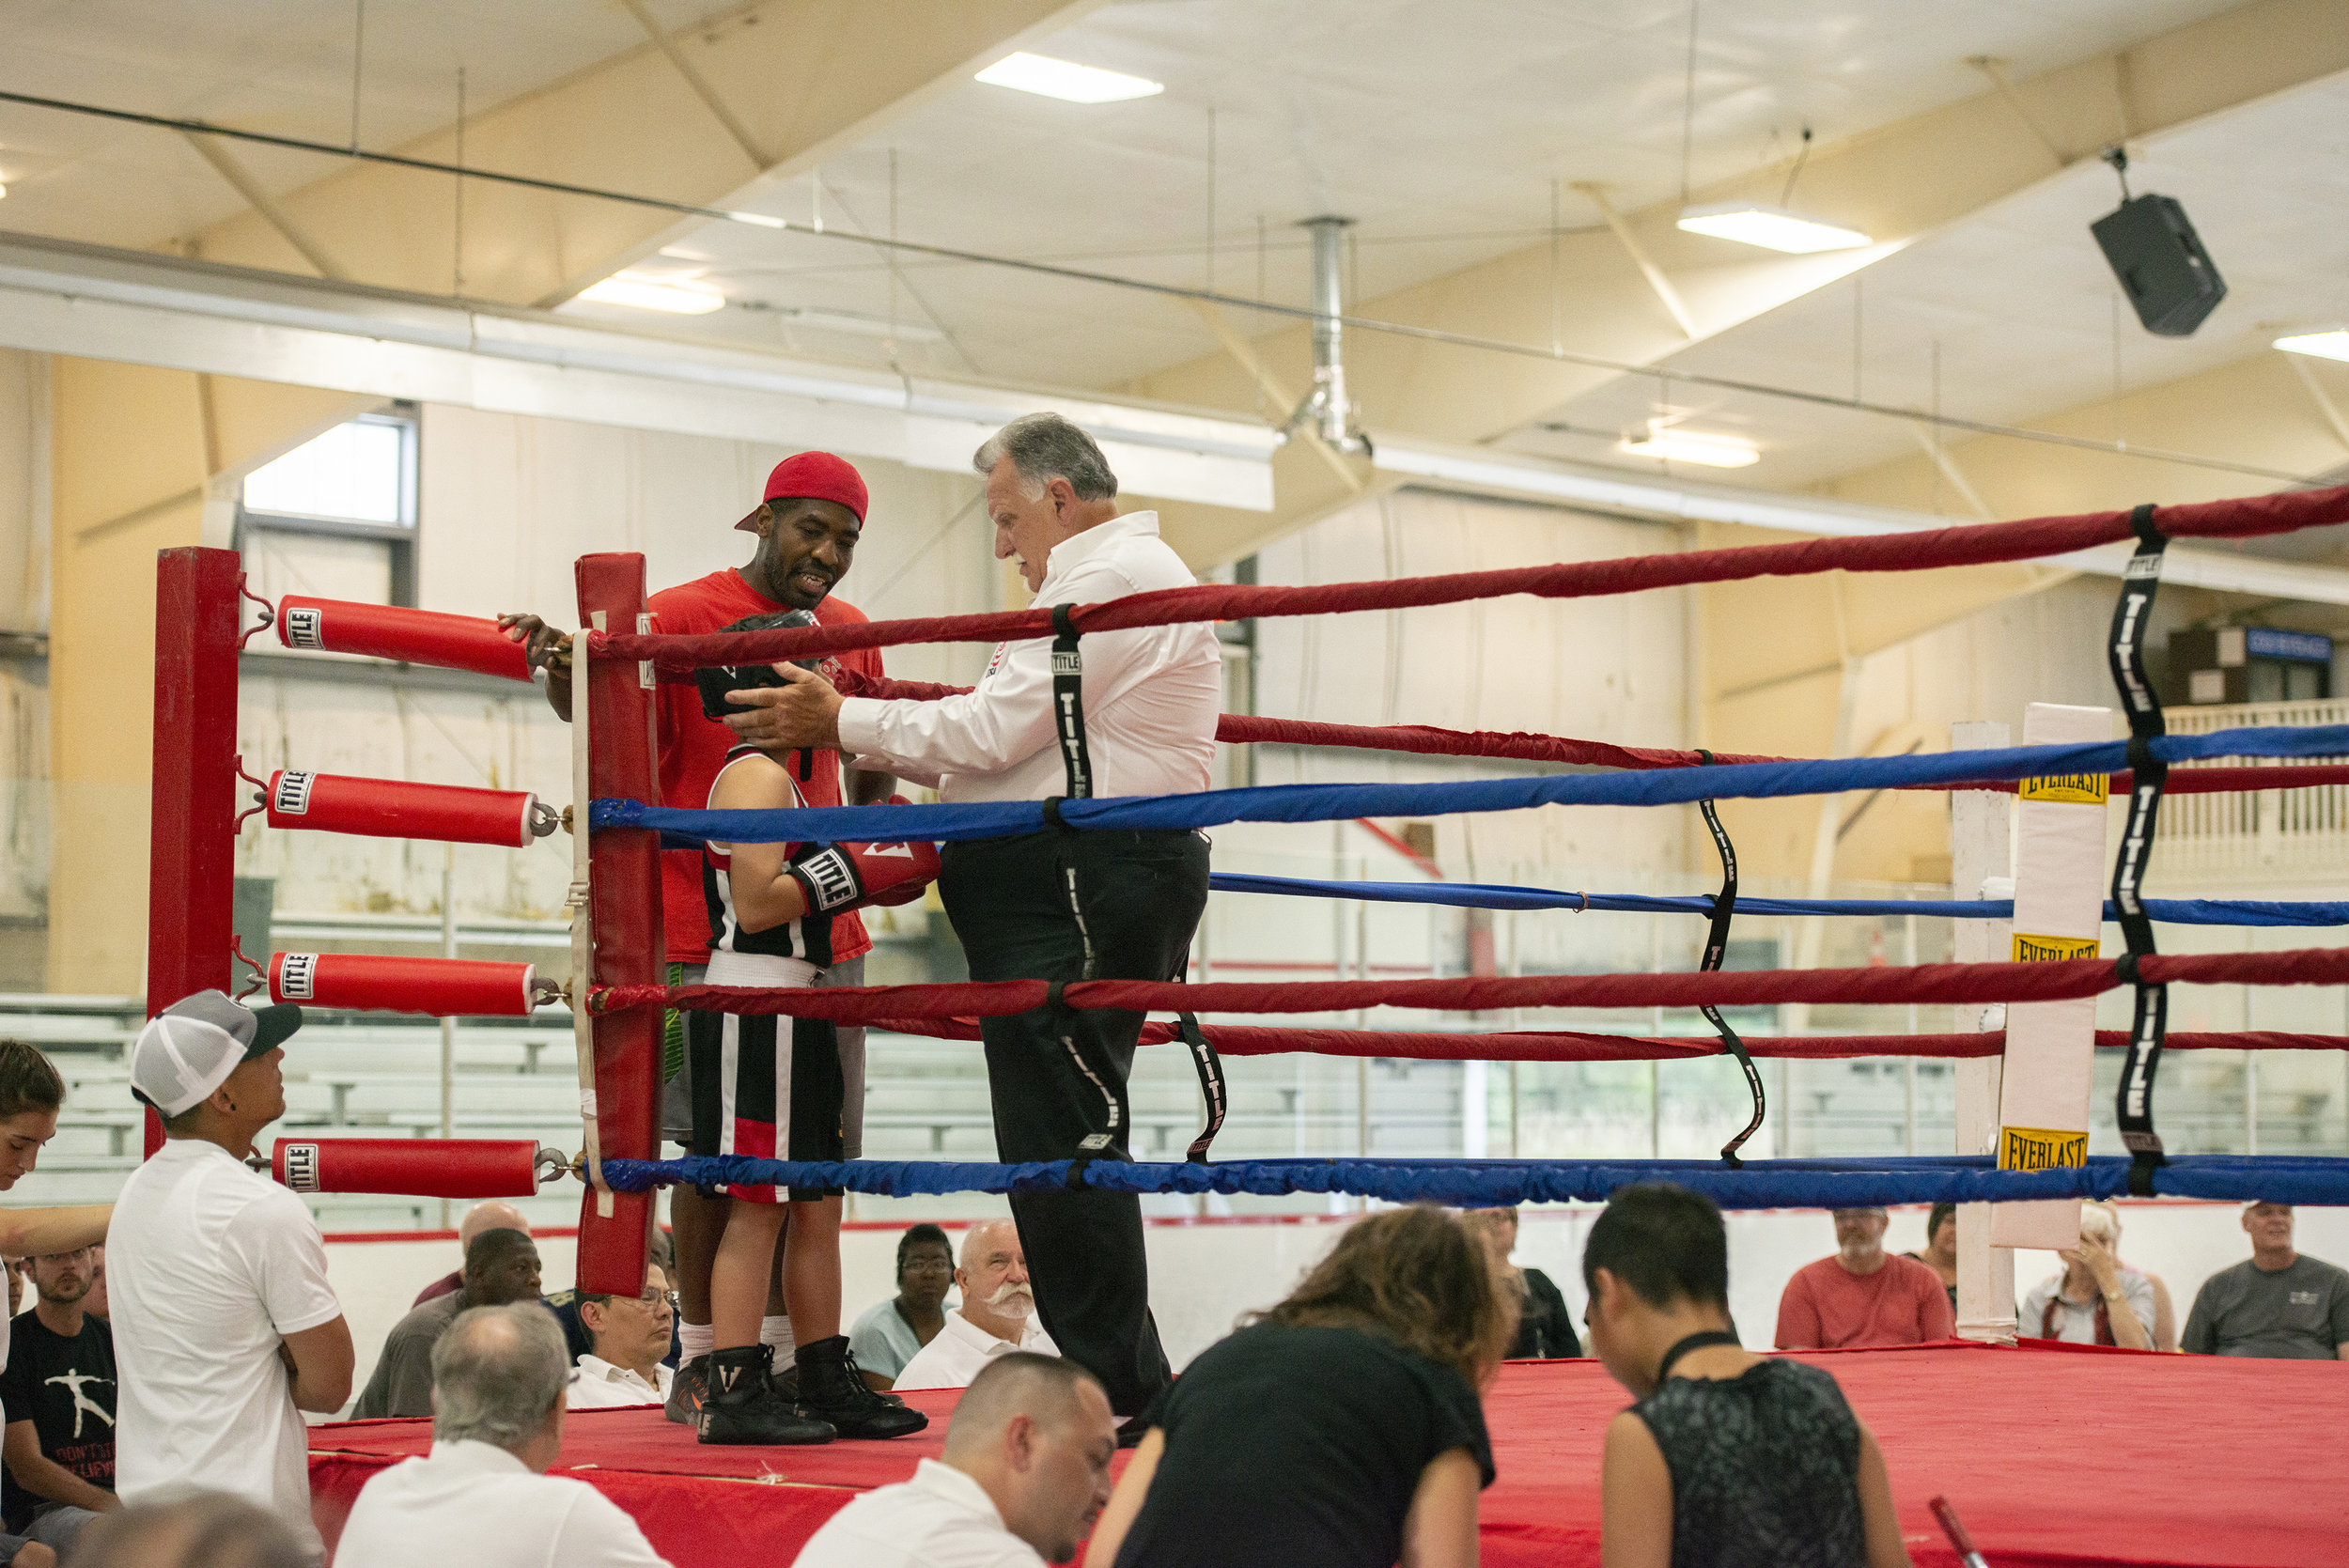 Boxing_Show_Reverie_photography_Peek-a-Boo_Boxing_Gym_River Falls.jpg